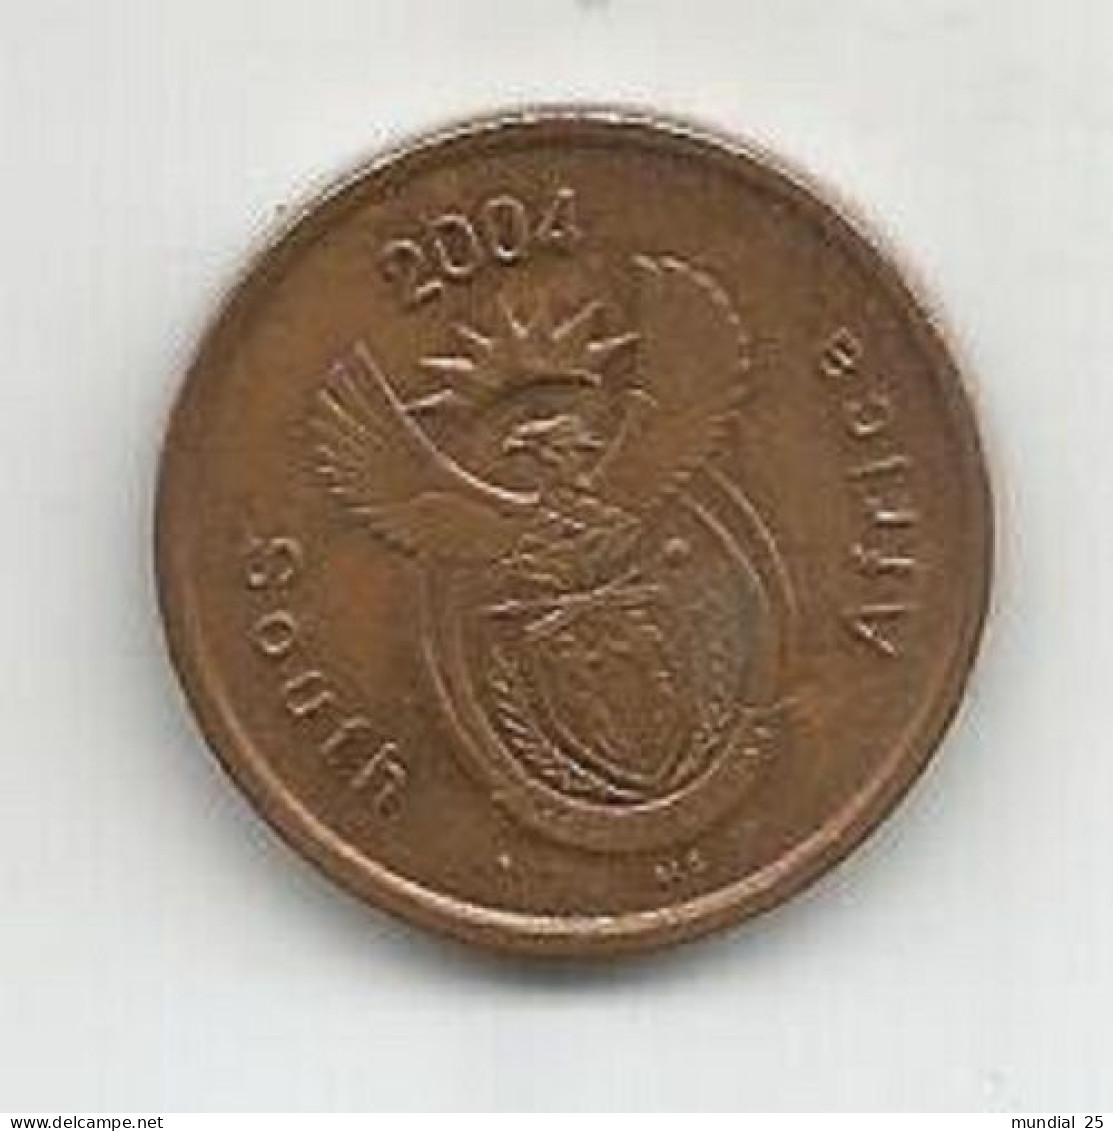 SOUTH AFRICA 5 CENTS 2004 - South Africa